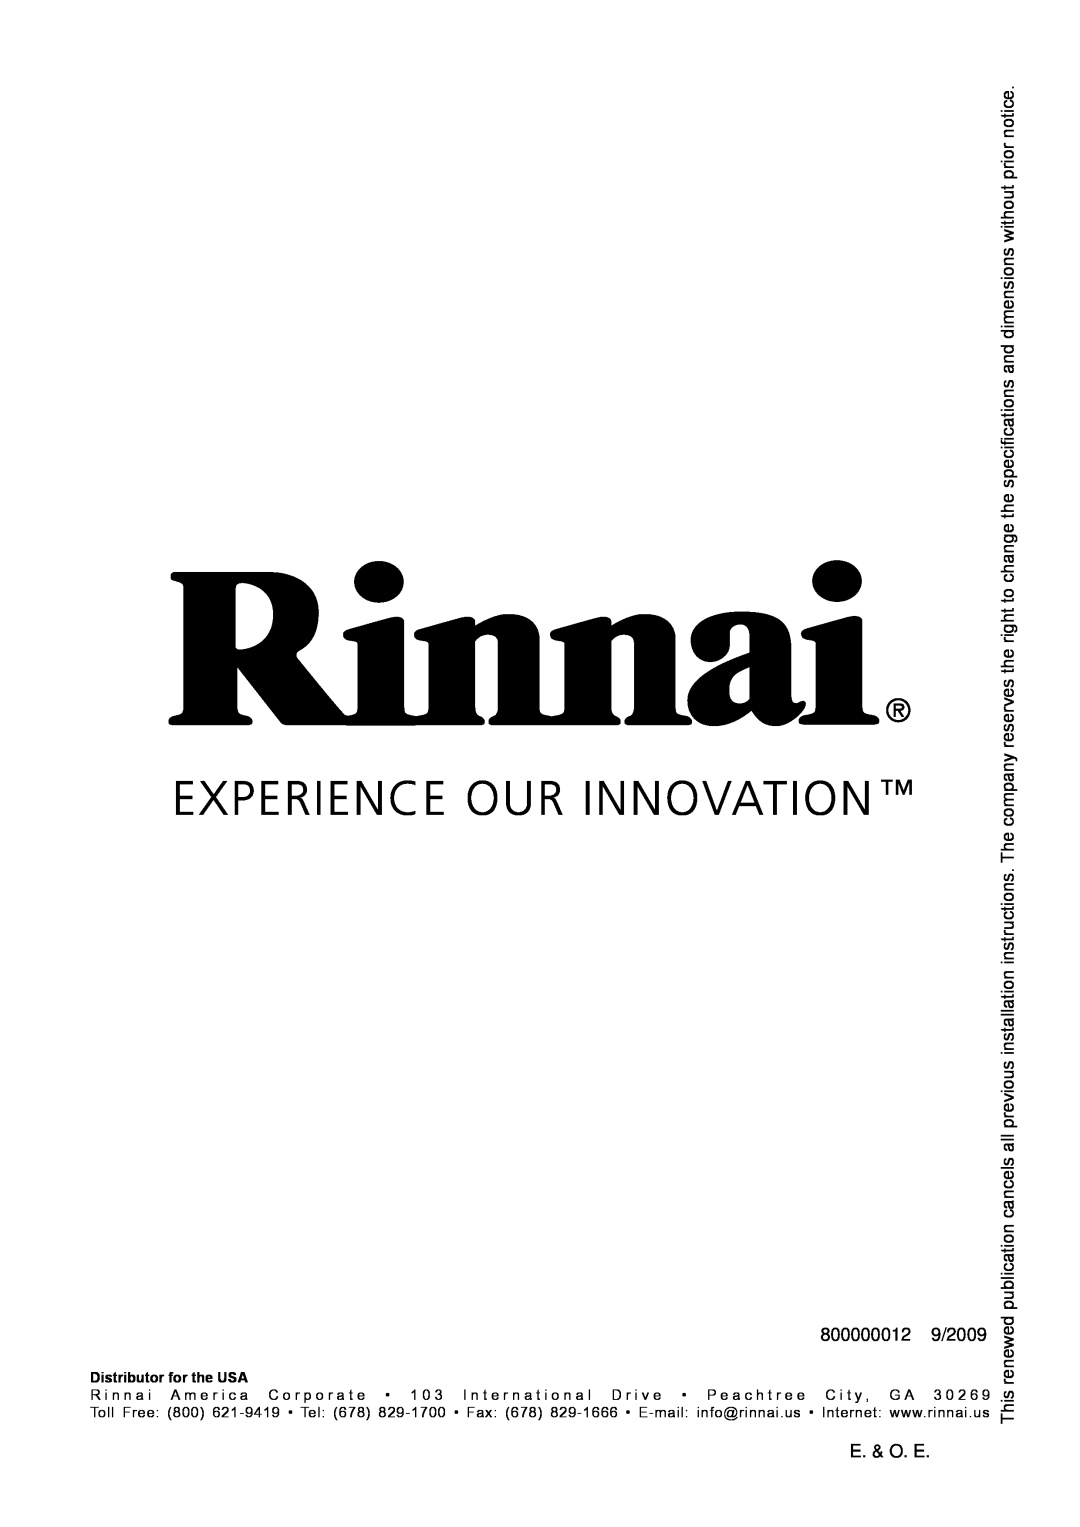 Rinnai E110CP, E75CN, E110CN, E75CP user manual 800000012 9/2009, E. & O. E, Distributor for the USA 